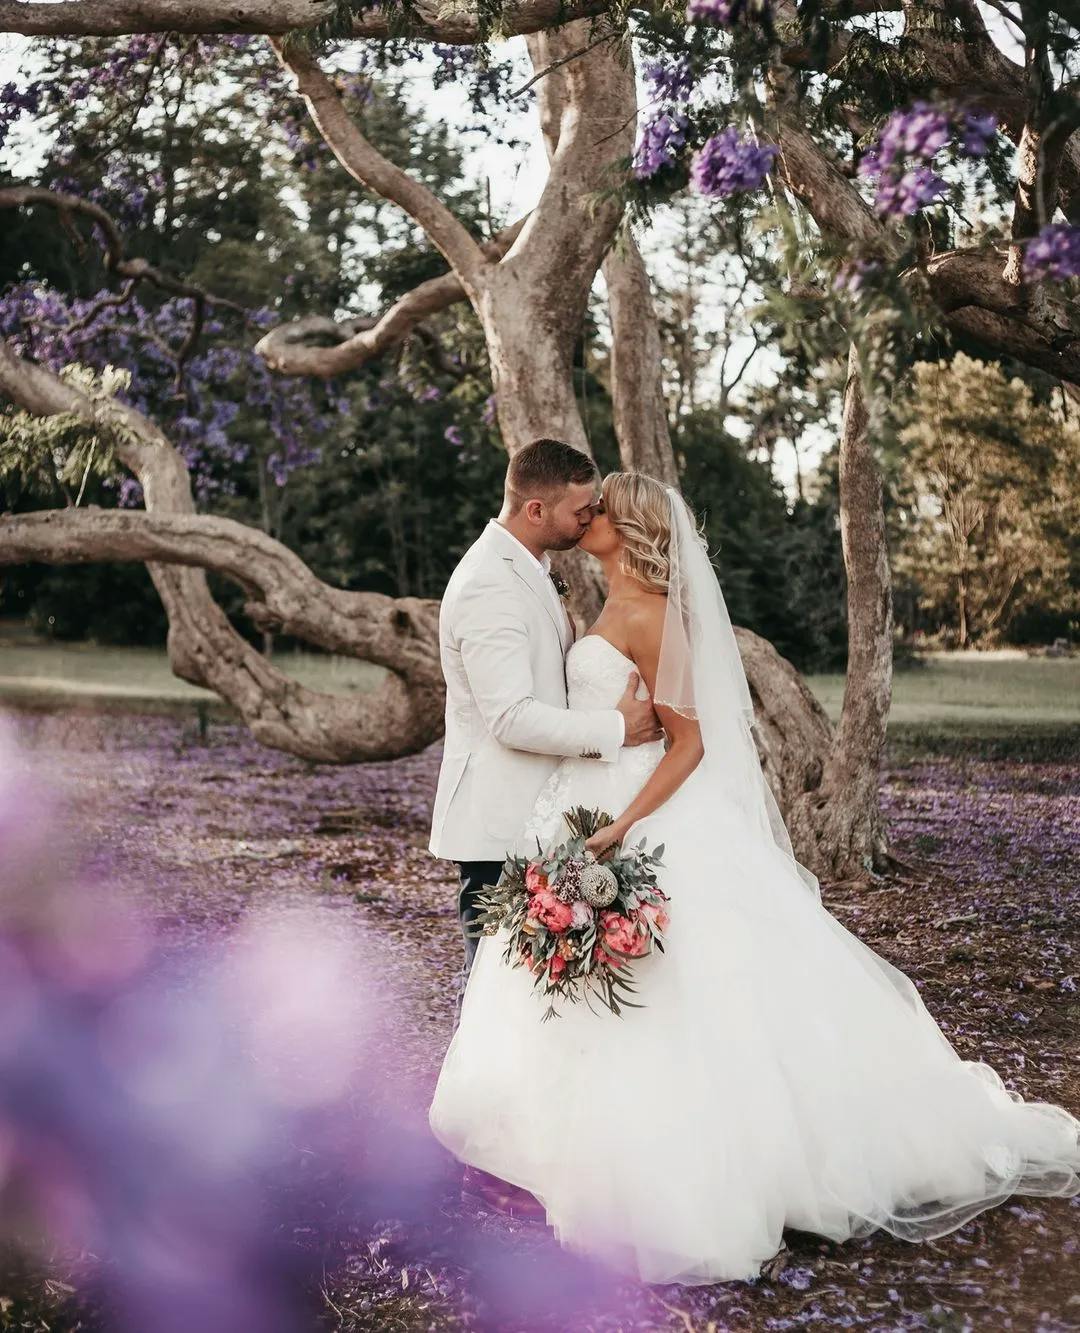 A bride and groom share a kiss under a large tree with twisted branches and purple flowers. The bride holds a bouquet of pink, white, and green flowers and wears a flowing white dress and veil. The ground is covered in purple petals, creating a whimsical atmosphere.